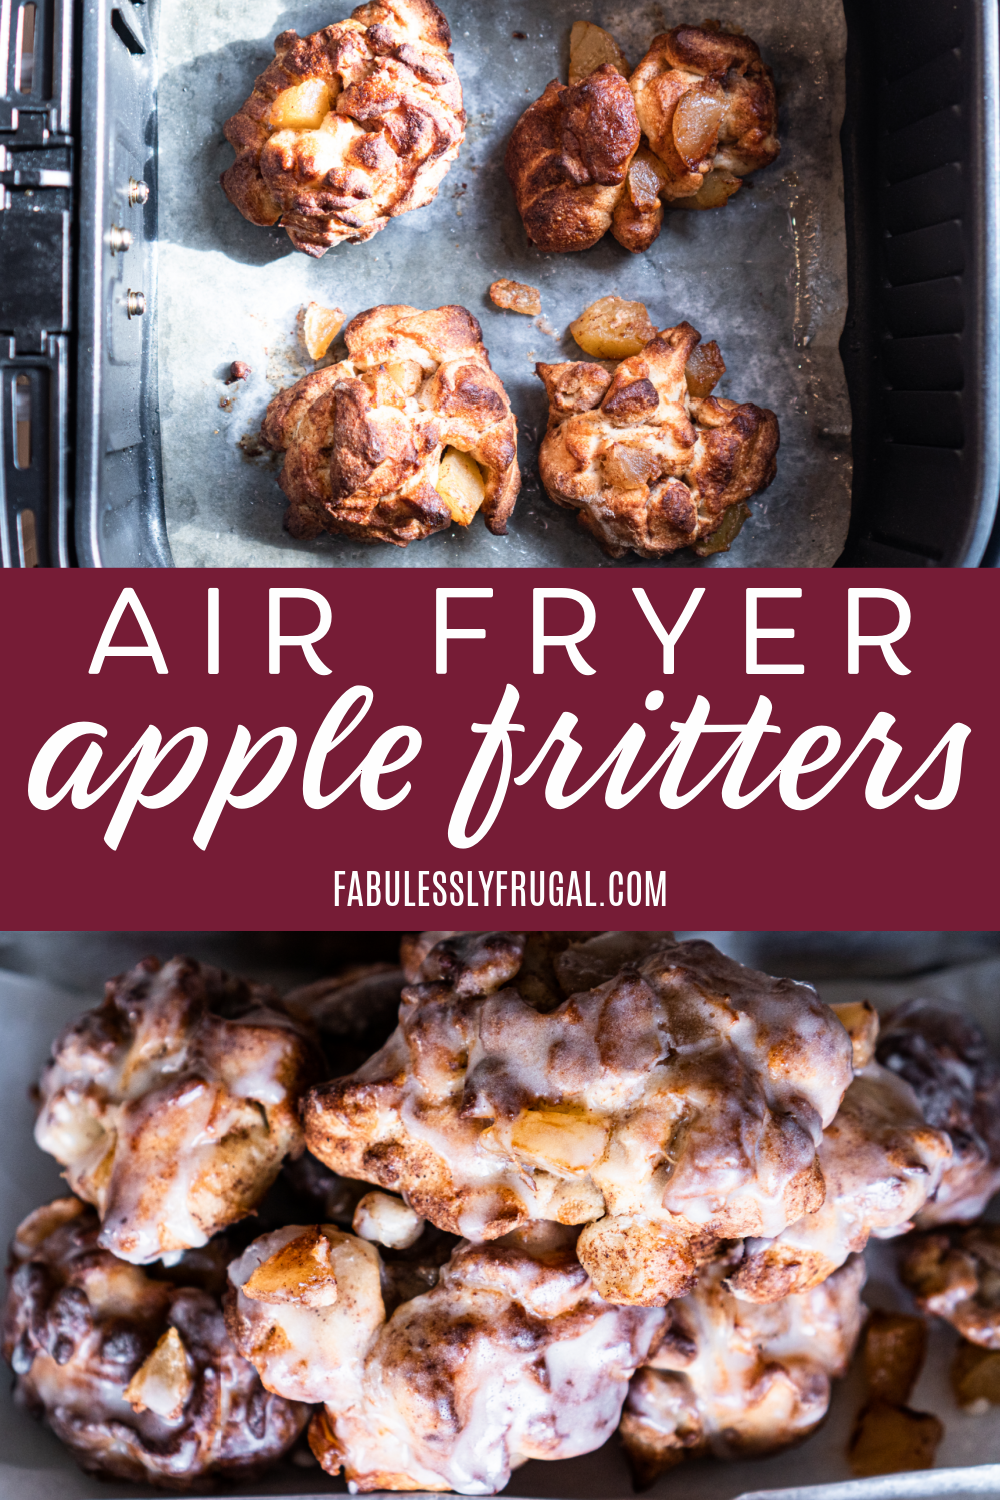 Air fryer apple fritters is our new favorite go-to snack. Ready in 20 minutes, everyone will love these crunchy, creamy, and delicious apple fritters in the air fryer. 